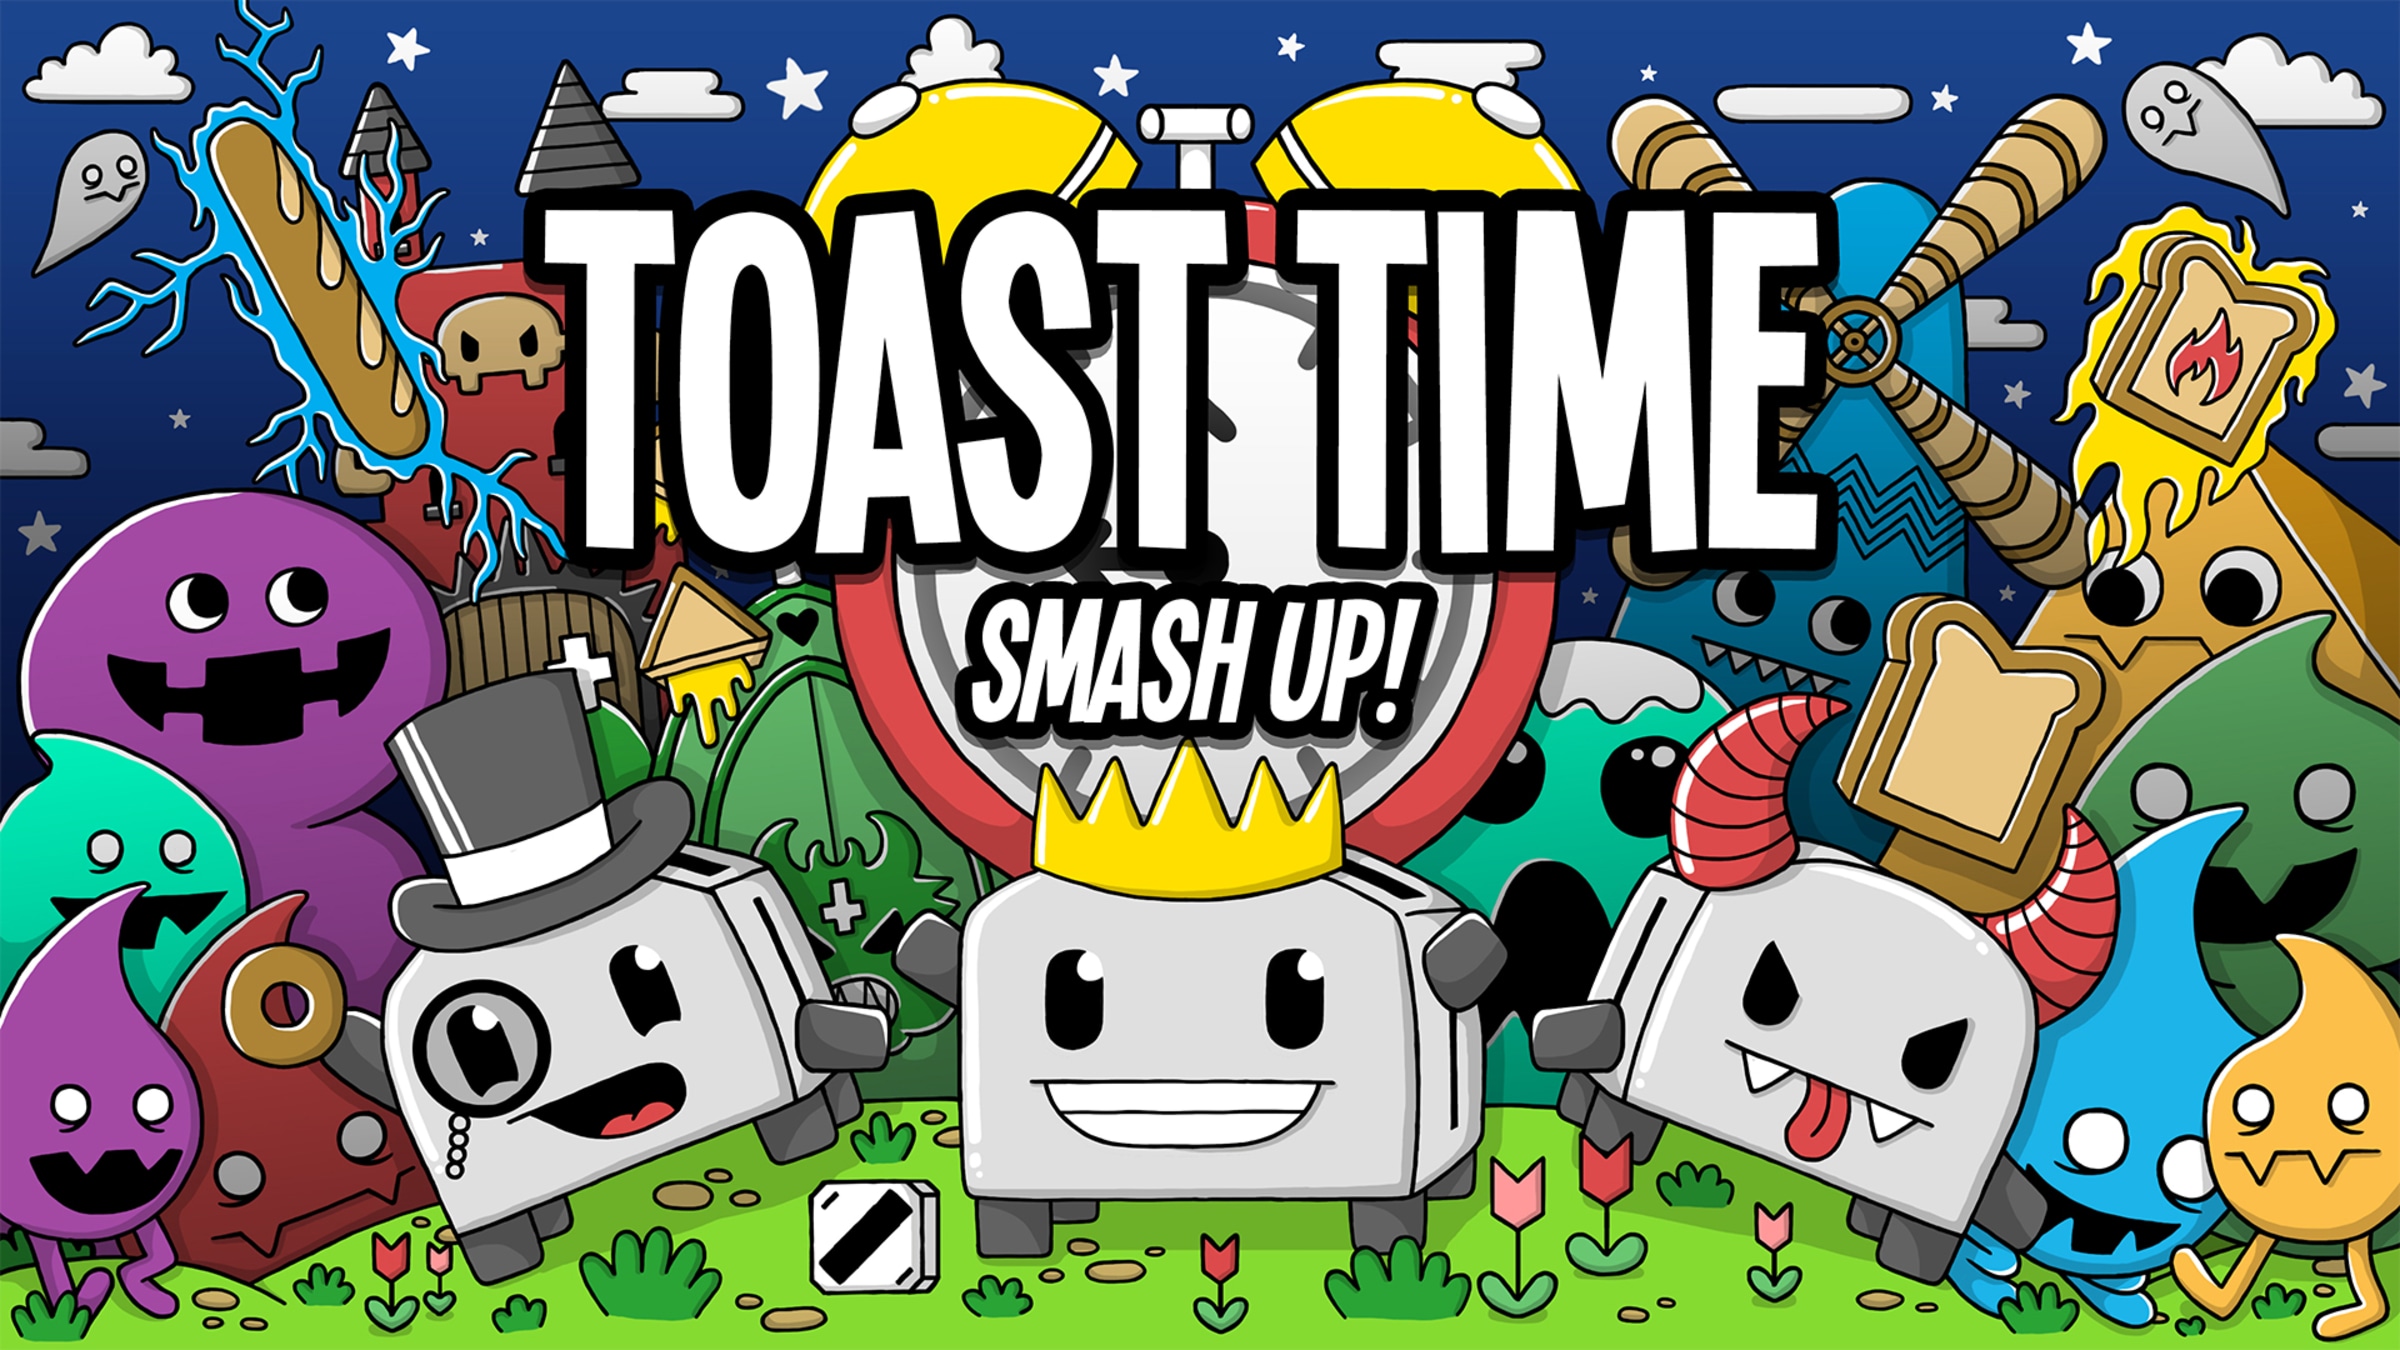 Toasted! for Nintendo Switch - Nintendo Official Site